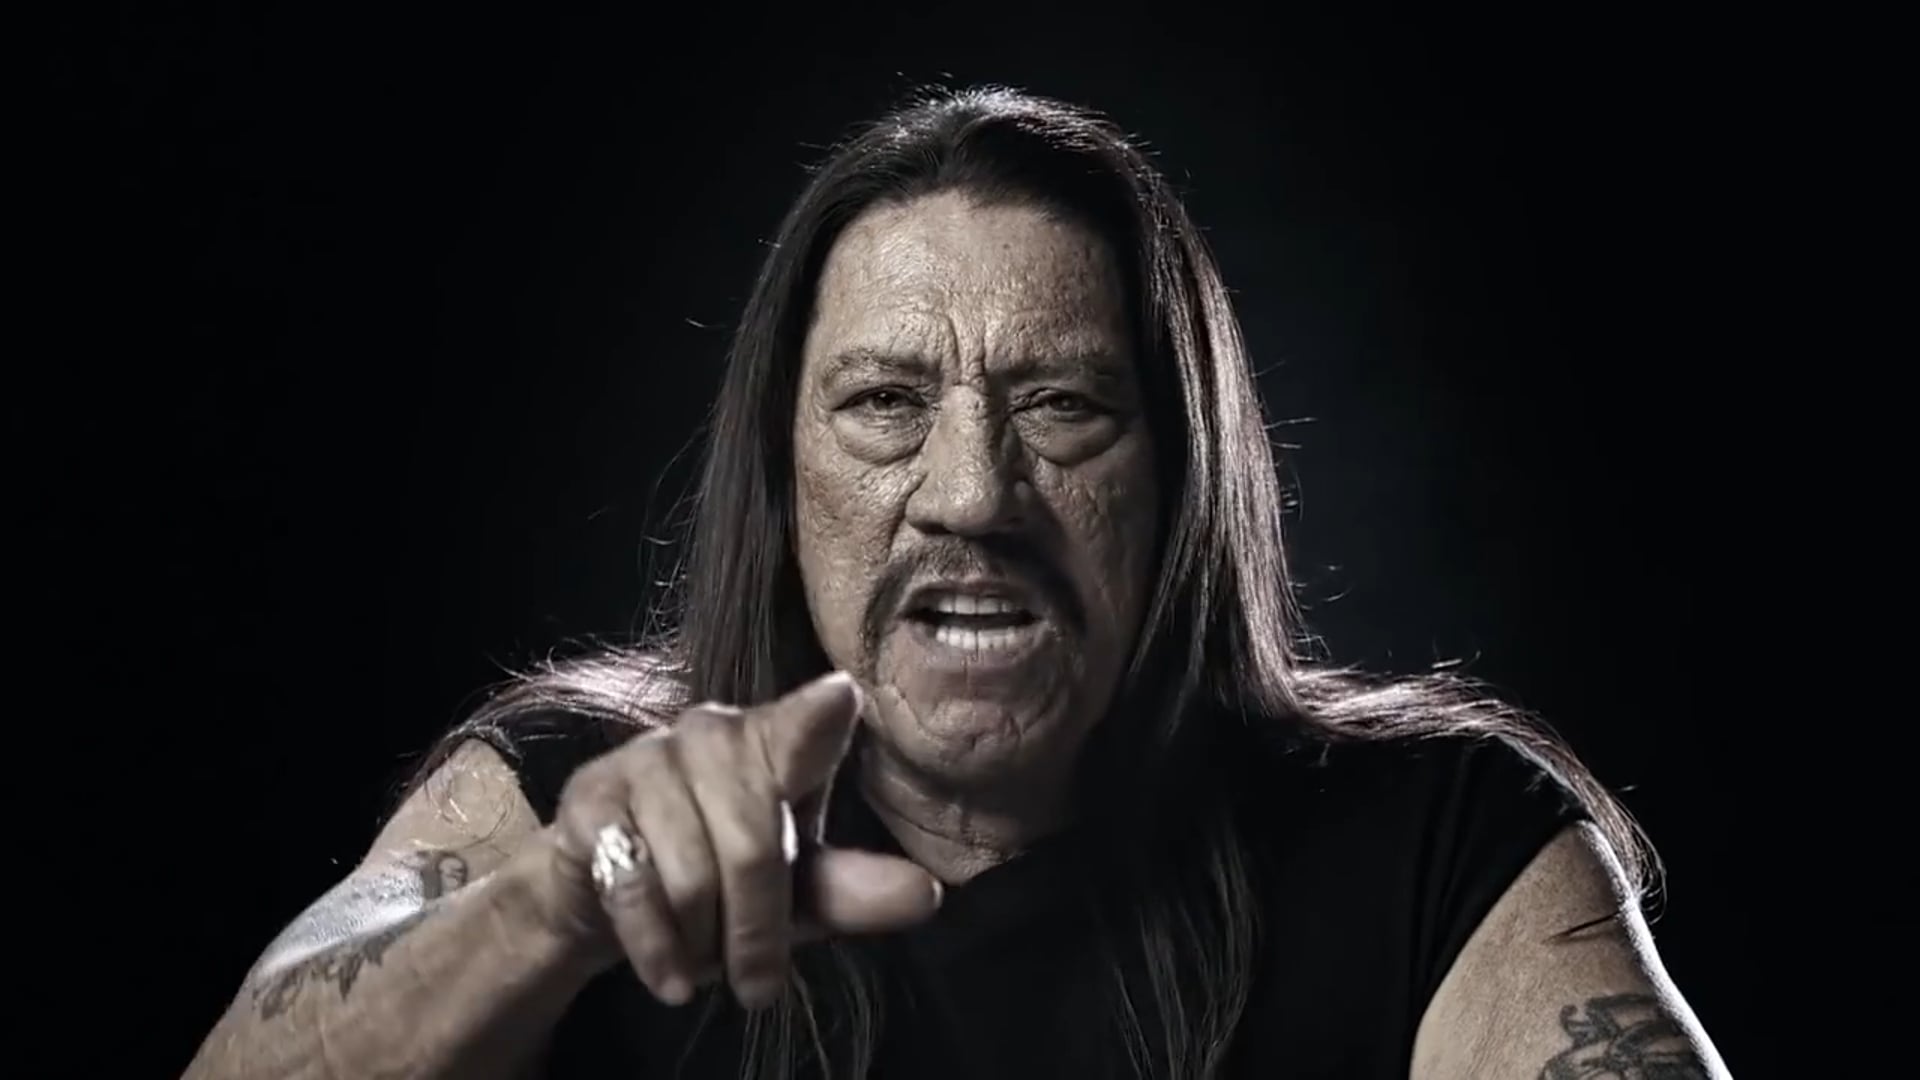 Danny Trejo tells us how to TakeBackTV with Sling TV